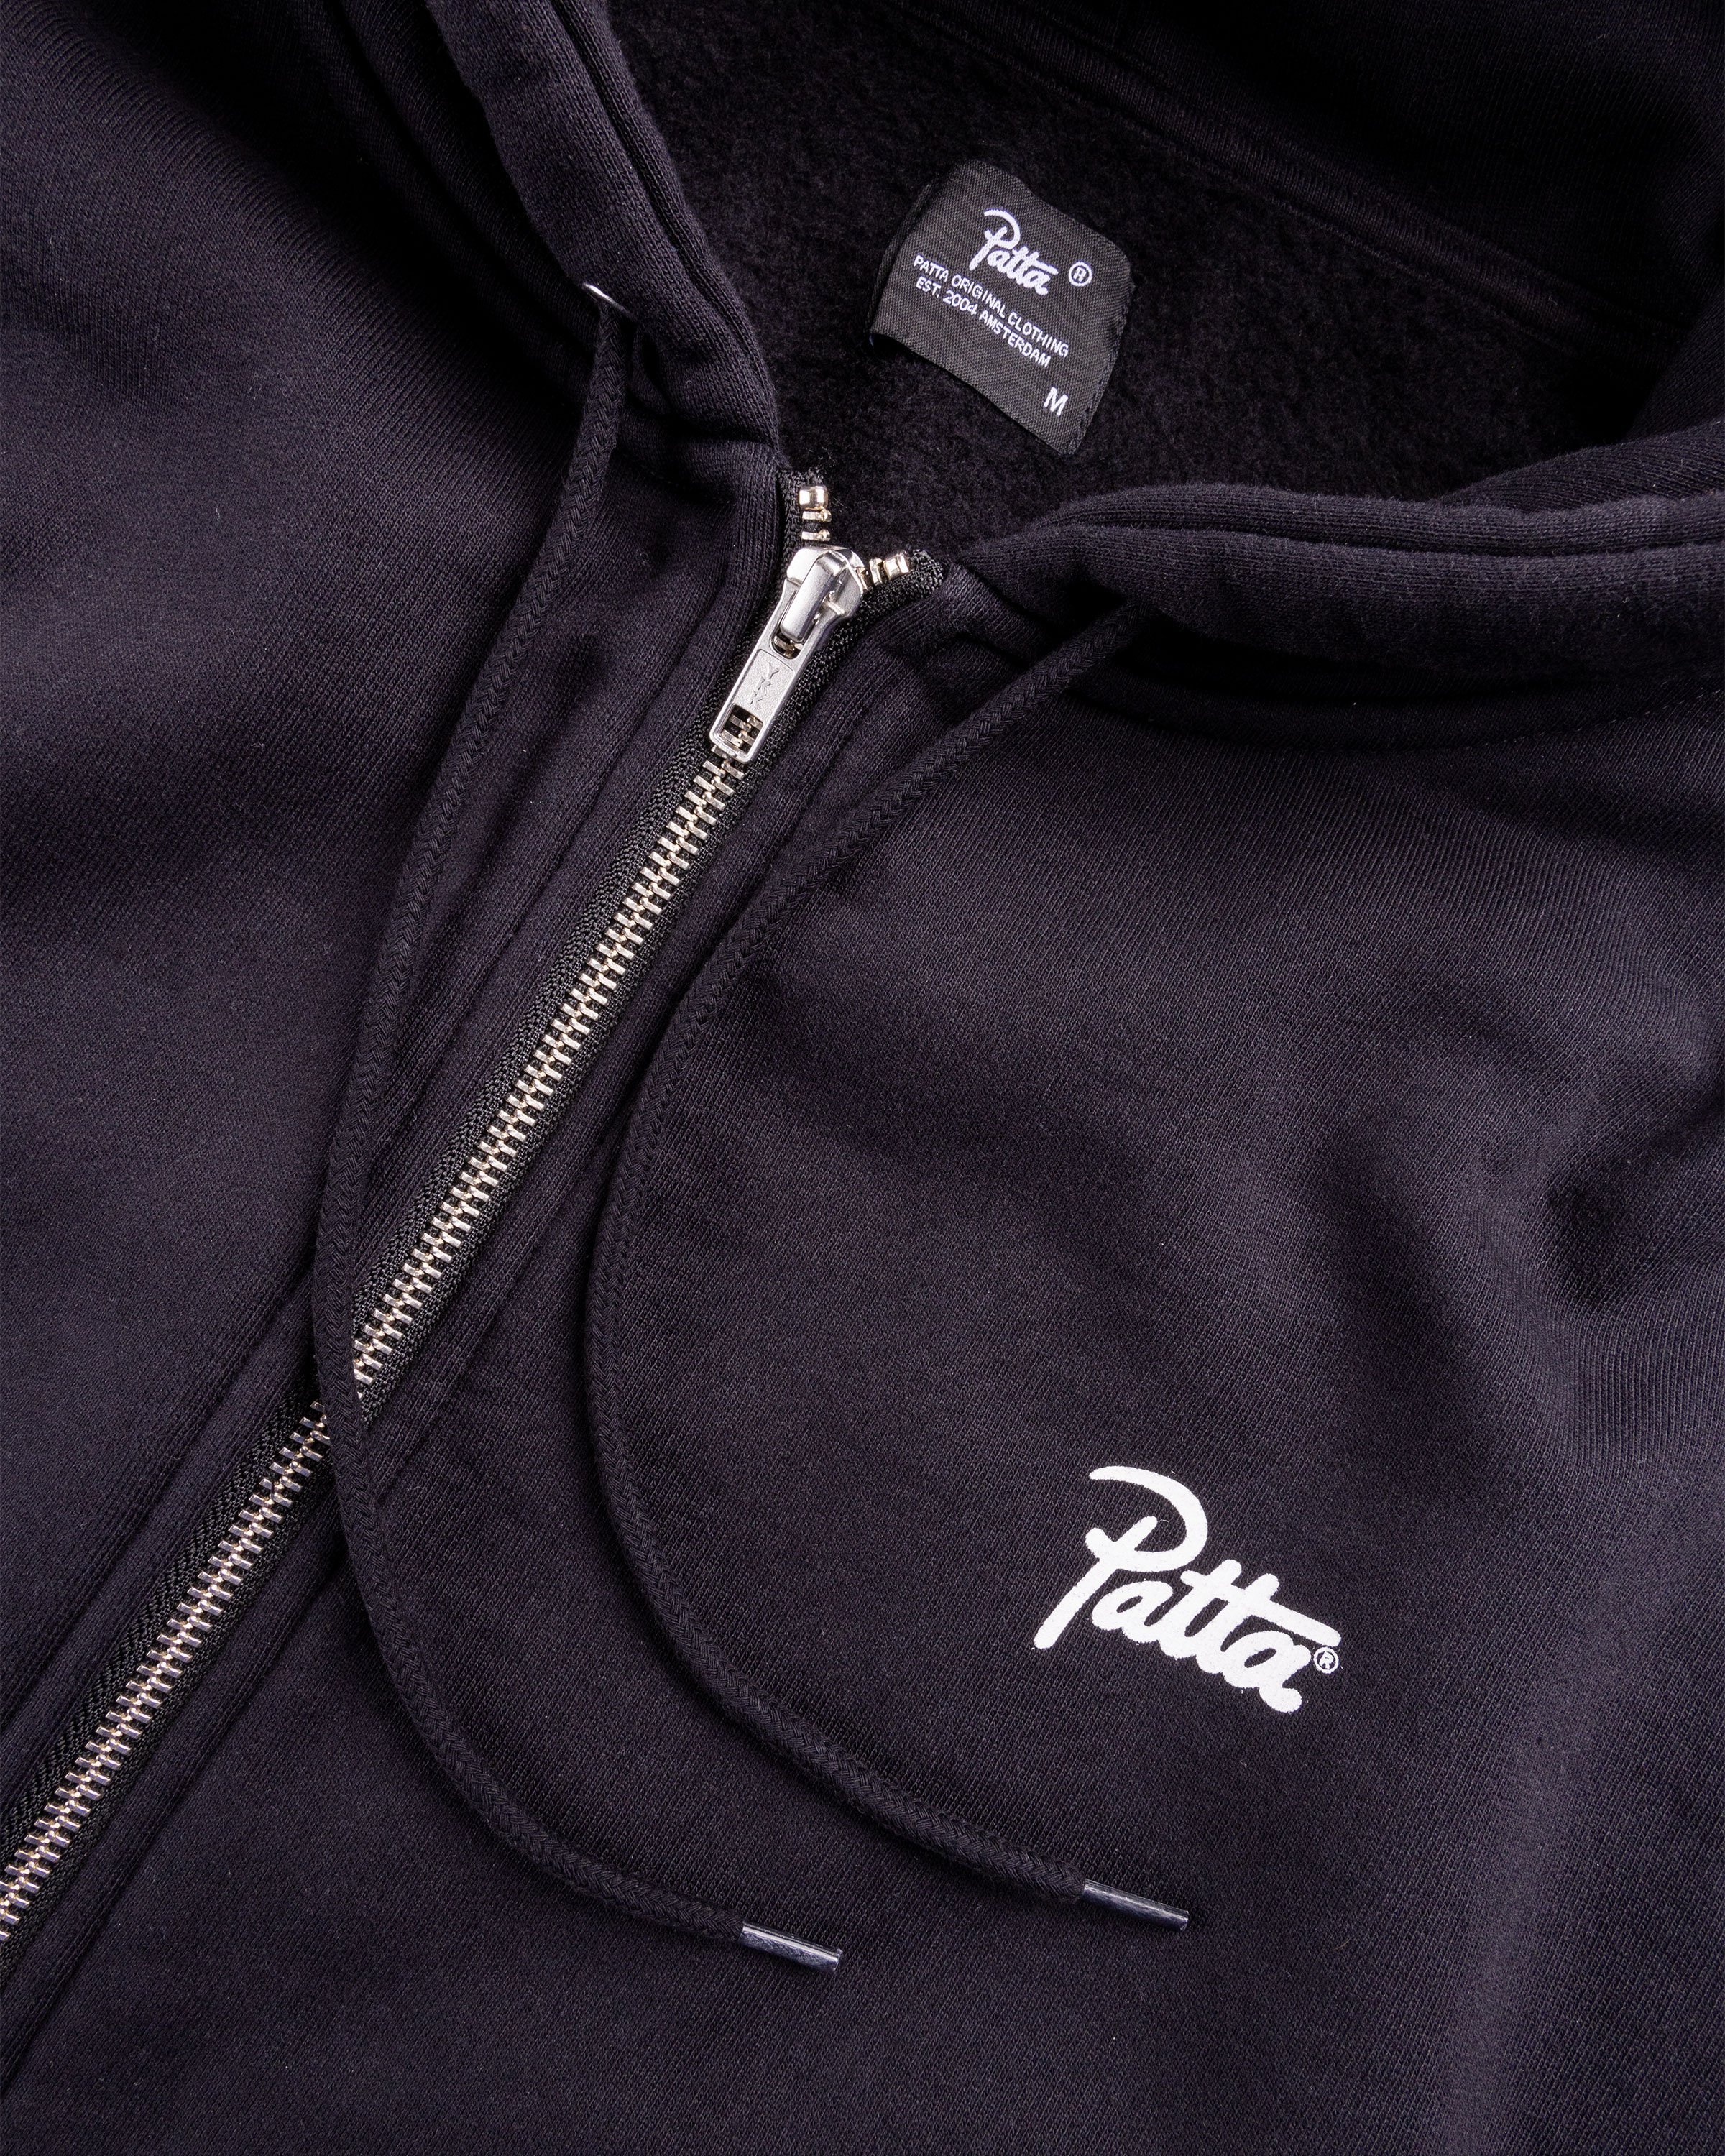 Patta - Classic Zip Up Hooded Sweater Black - Clothing - Black - Image 6